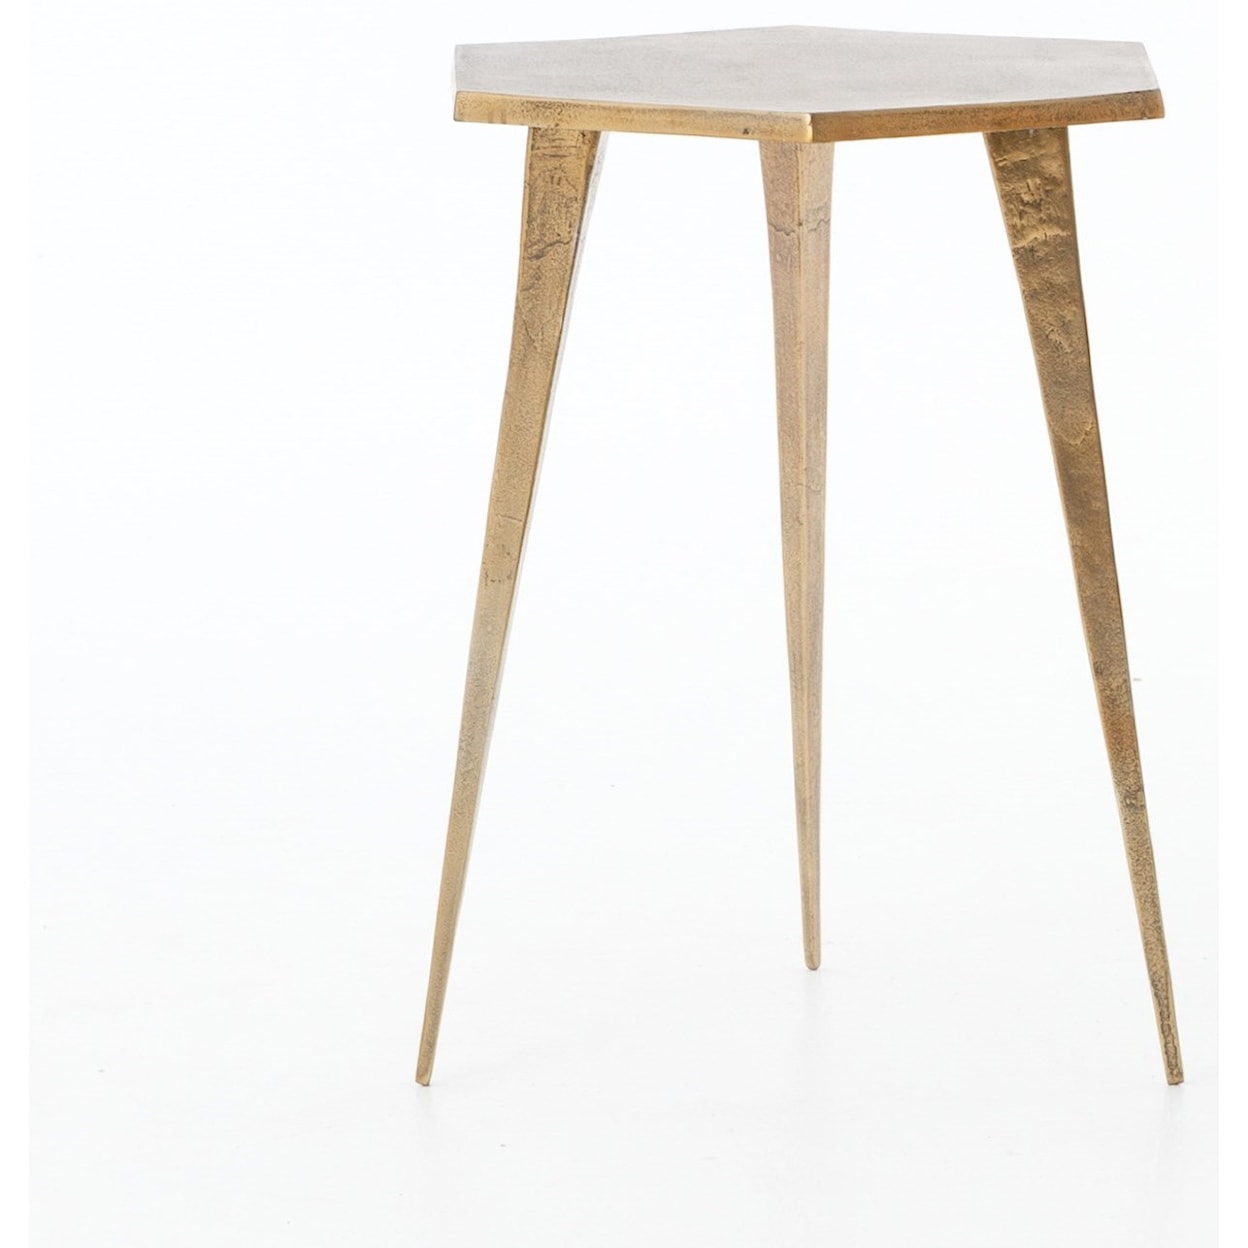 Four Hands Marlow End Table